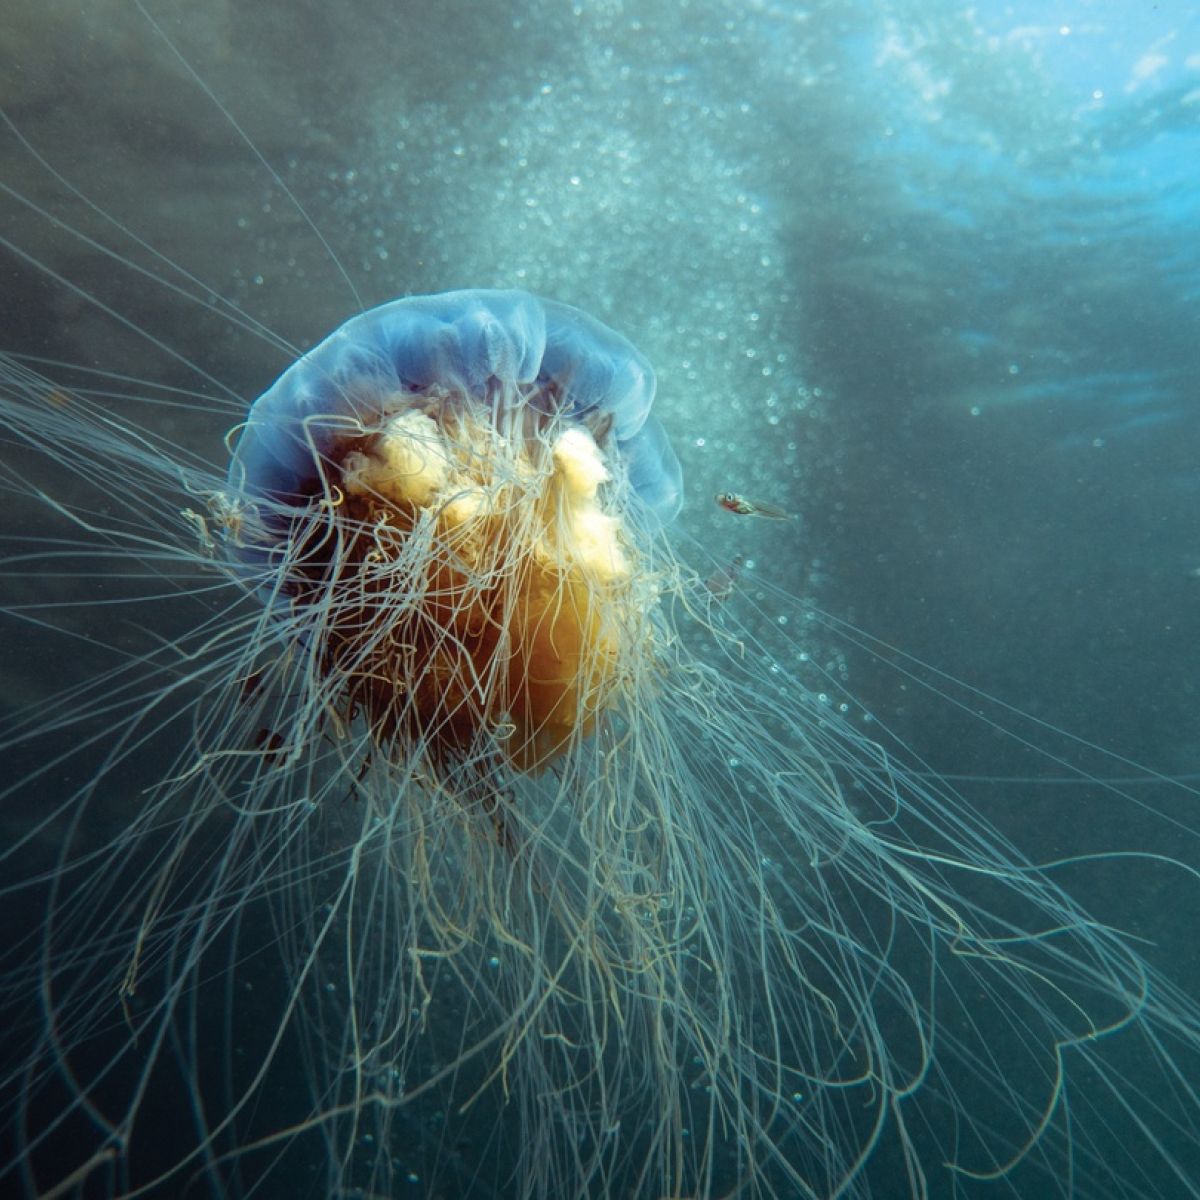 Ireland S Jellyfish Before You Swim In The Sea This Summer Check This Guide To Their Stings